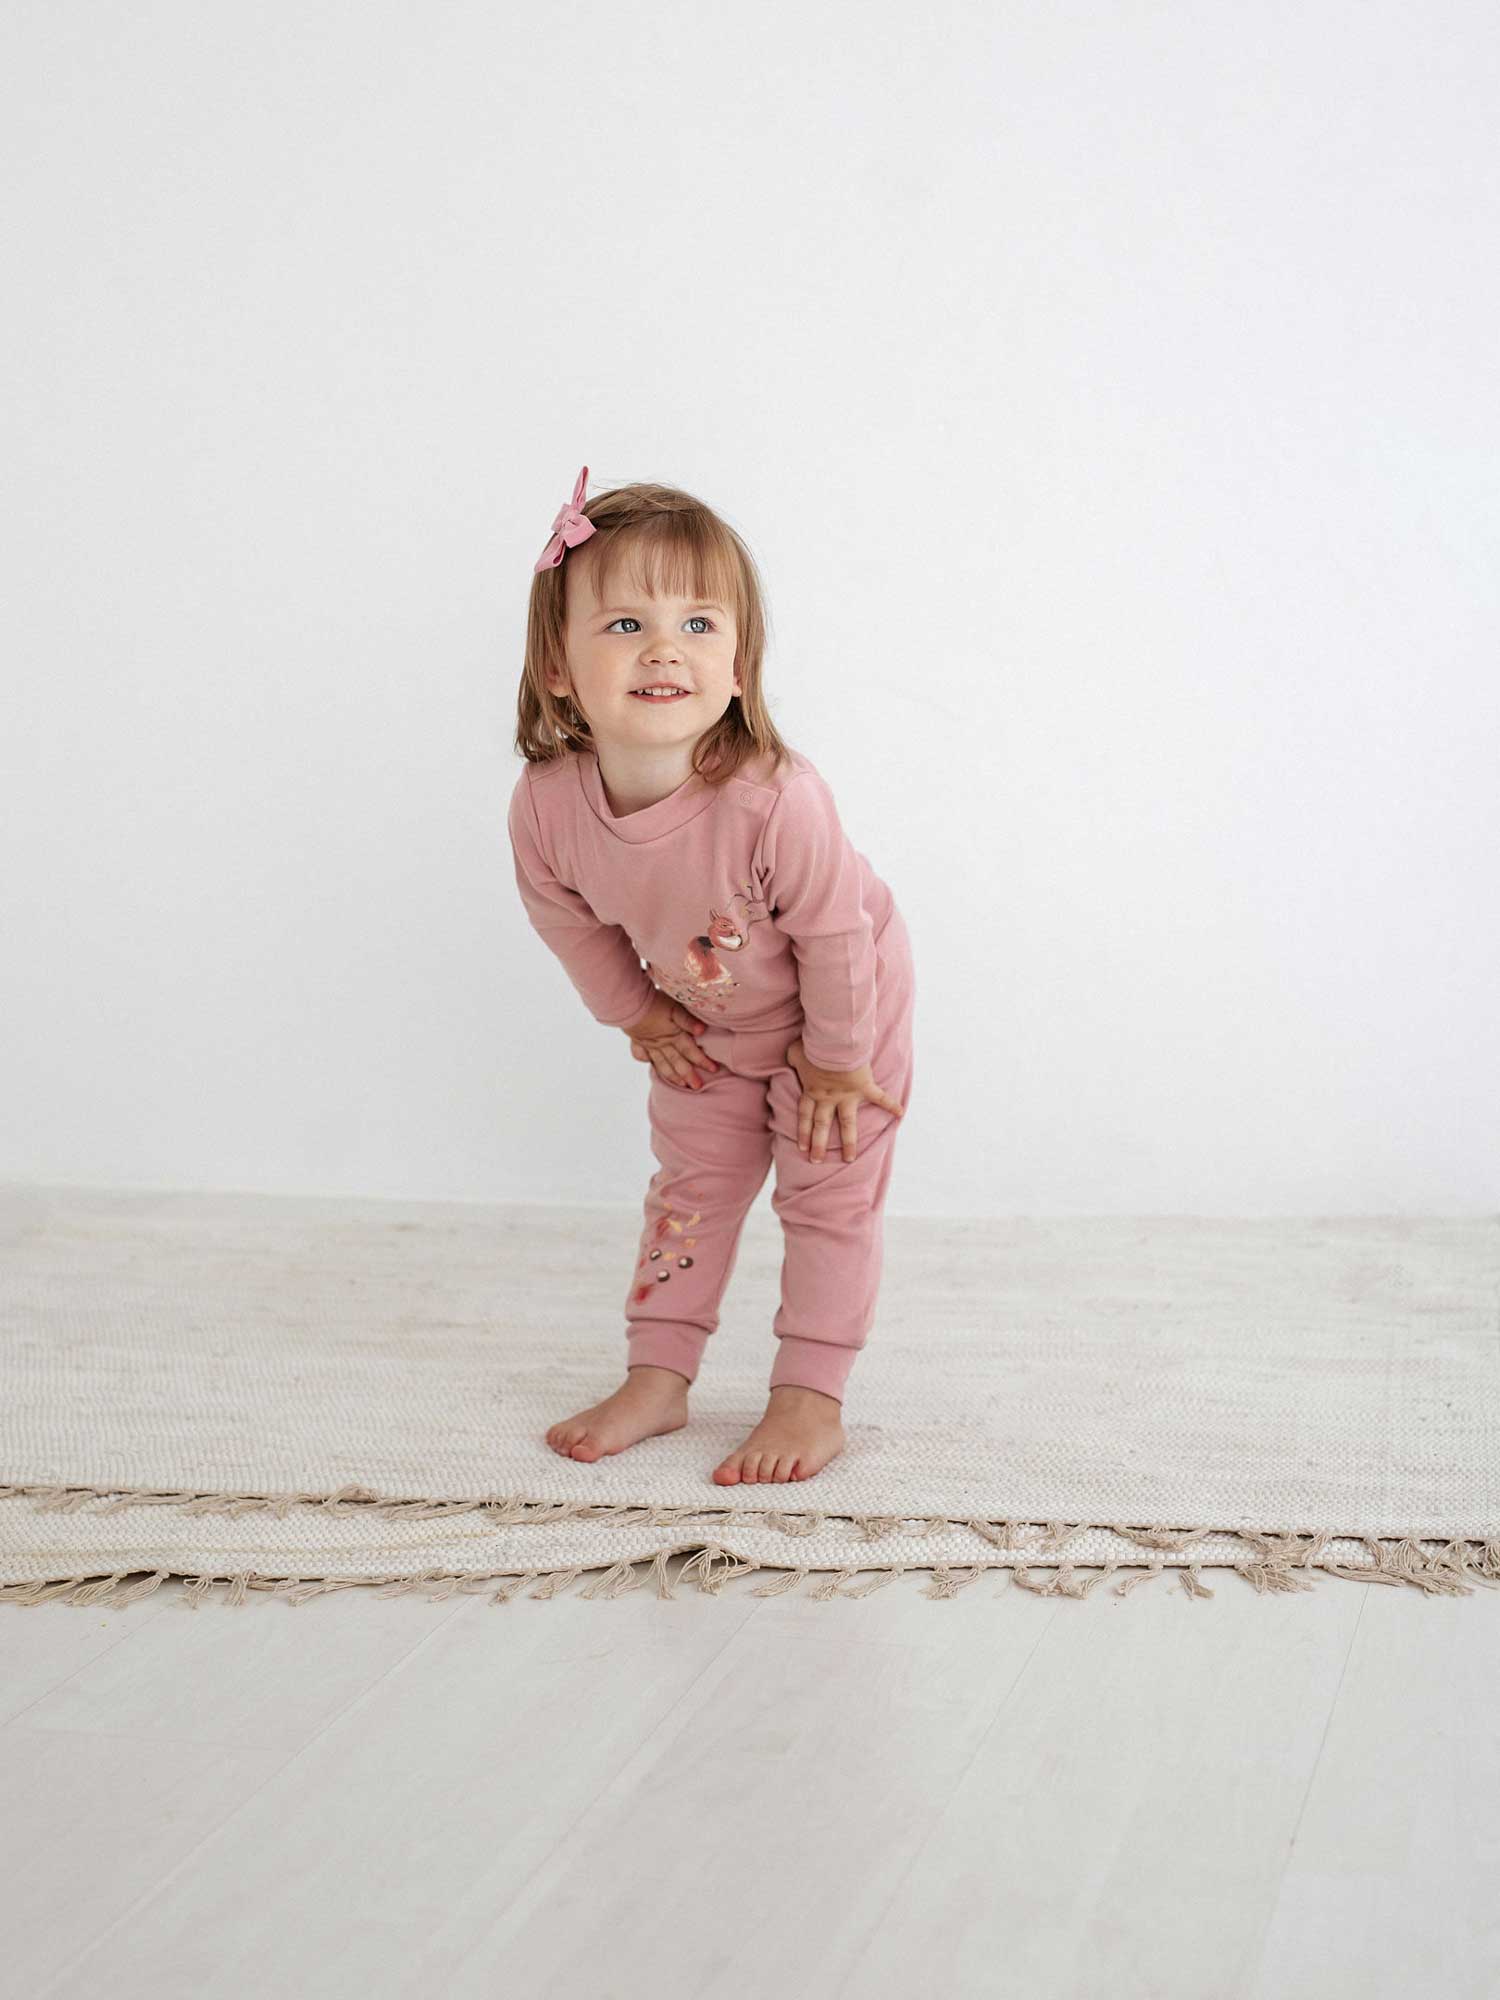 Made from 100% cotton, infant pants squirrel 351 feel very pleasent and are elastic enough to keep up with infant moves